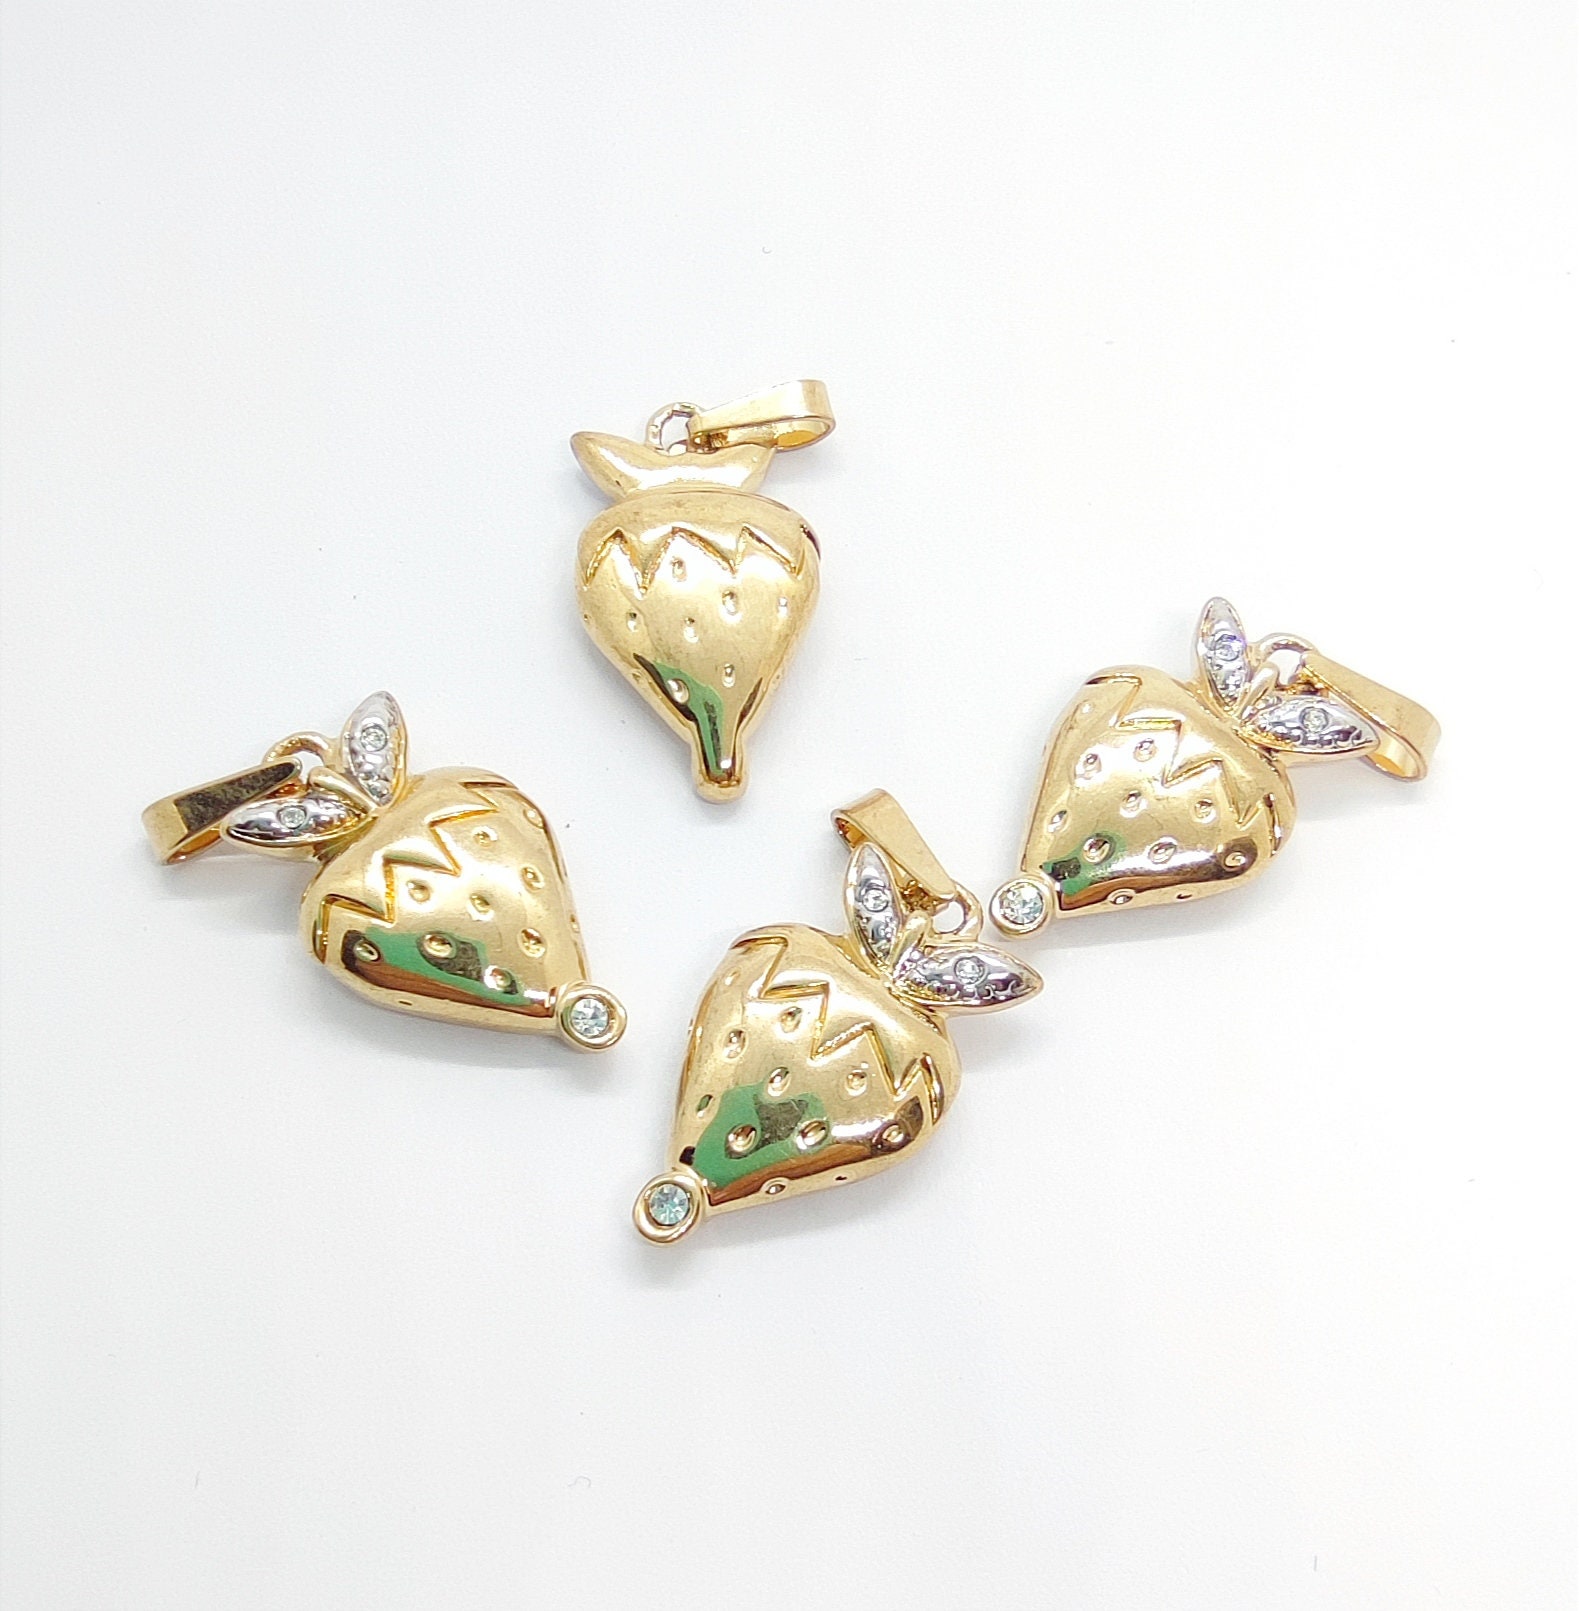 Year 2024 Small Charms in Sets of Ten in Gold, Golden Year Charms, Set of  Ten Gold Year Charms, Gold Year Embellishment 